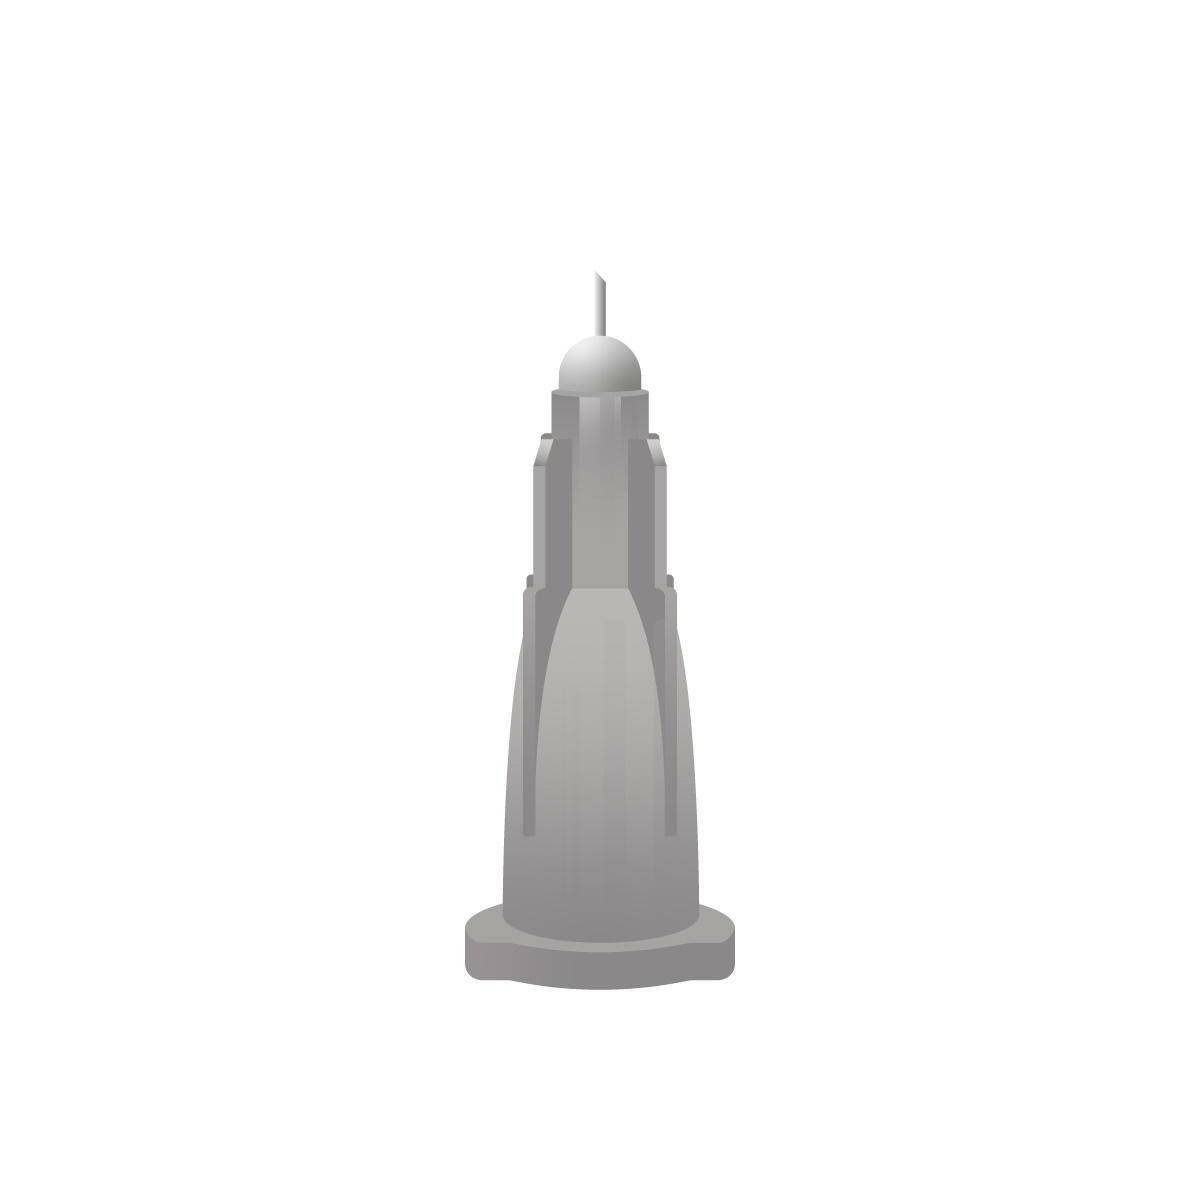 27g Grey 2.5mm Meso-relle Micro Needle for Microtherapy - UKMEDI